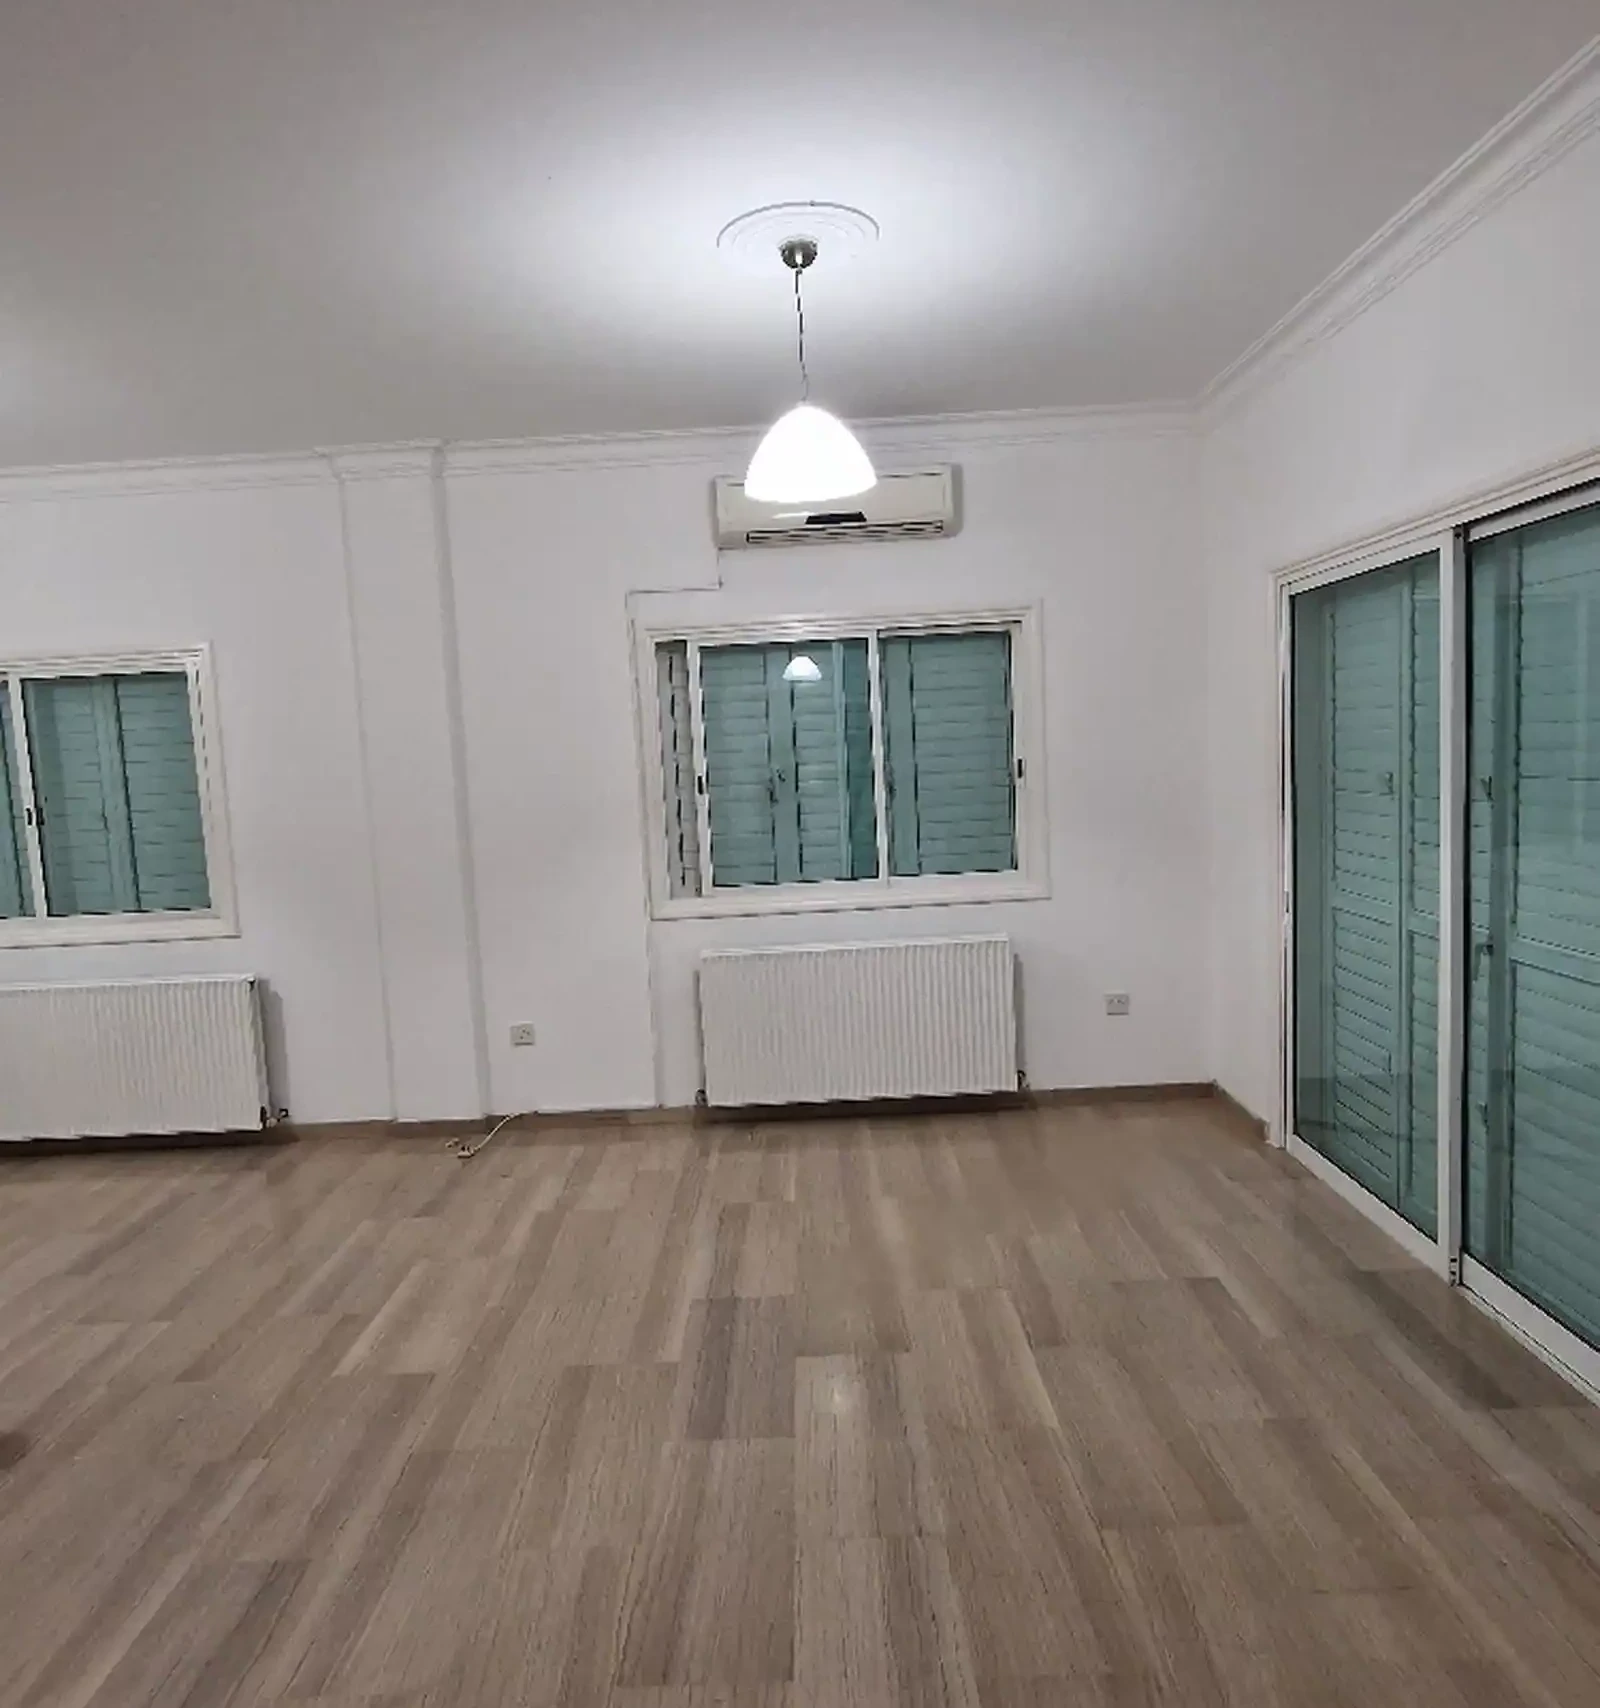 3-bedroom apartment to rent €1.250, image 1